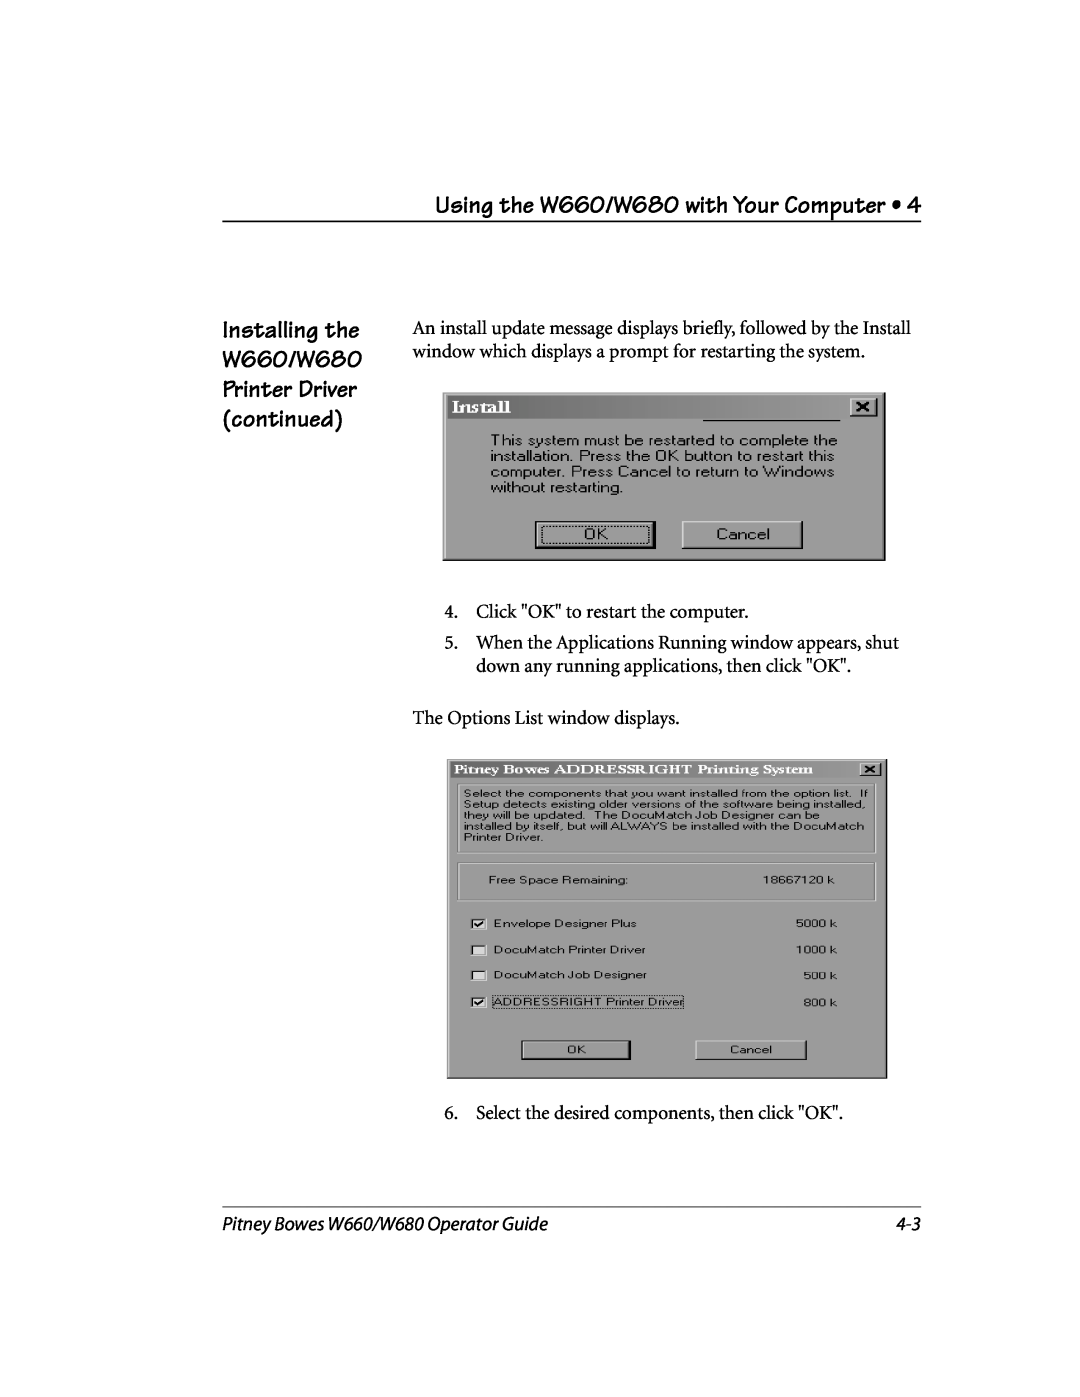 Pitney Bowes manual Using the W660/W680 with Your Computer, Installing the W660/W680 Printer Driver continued 